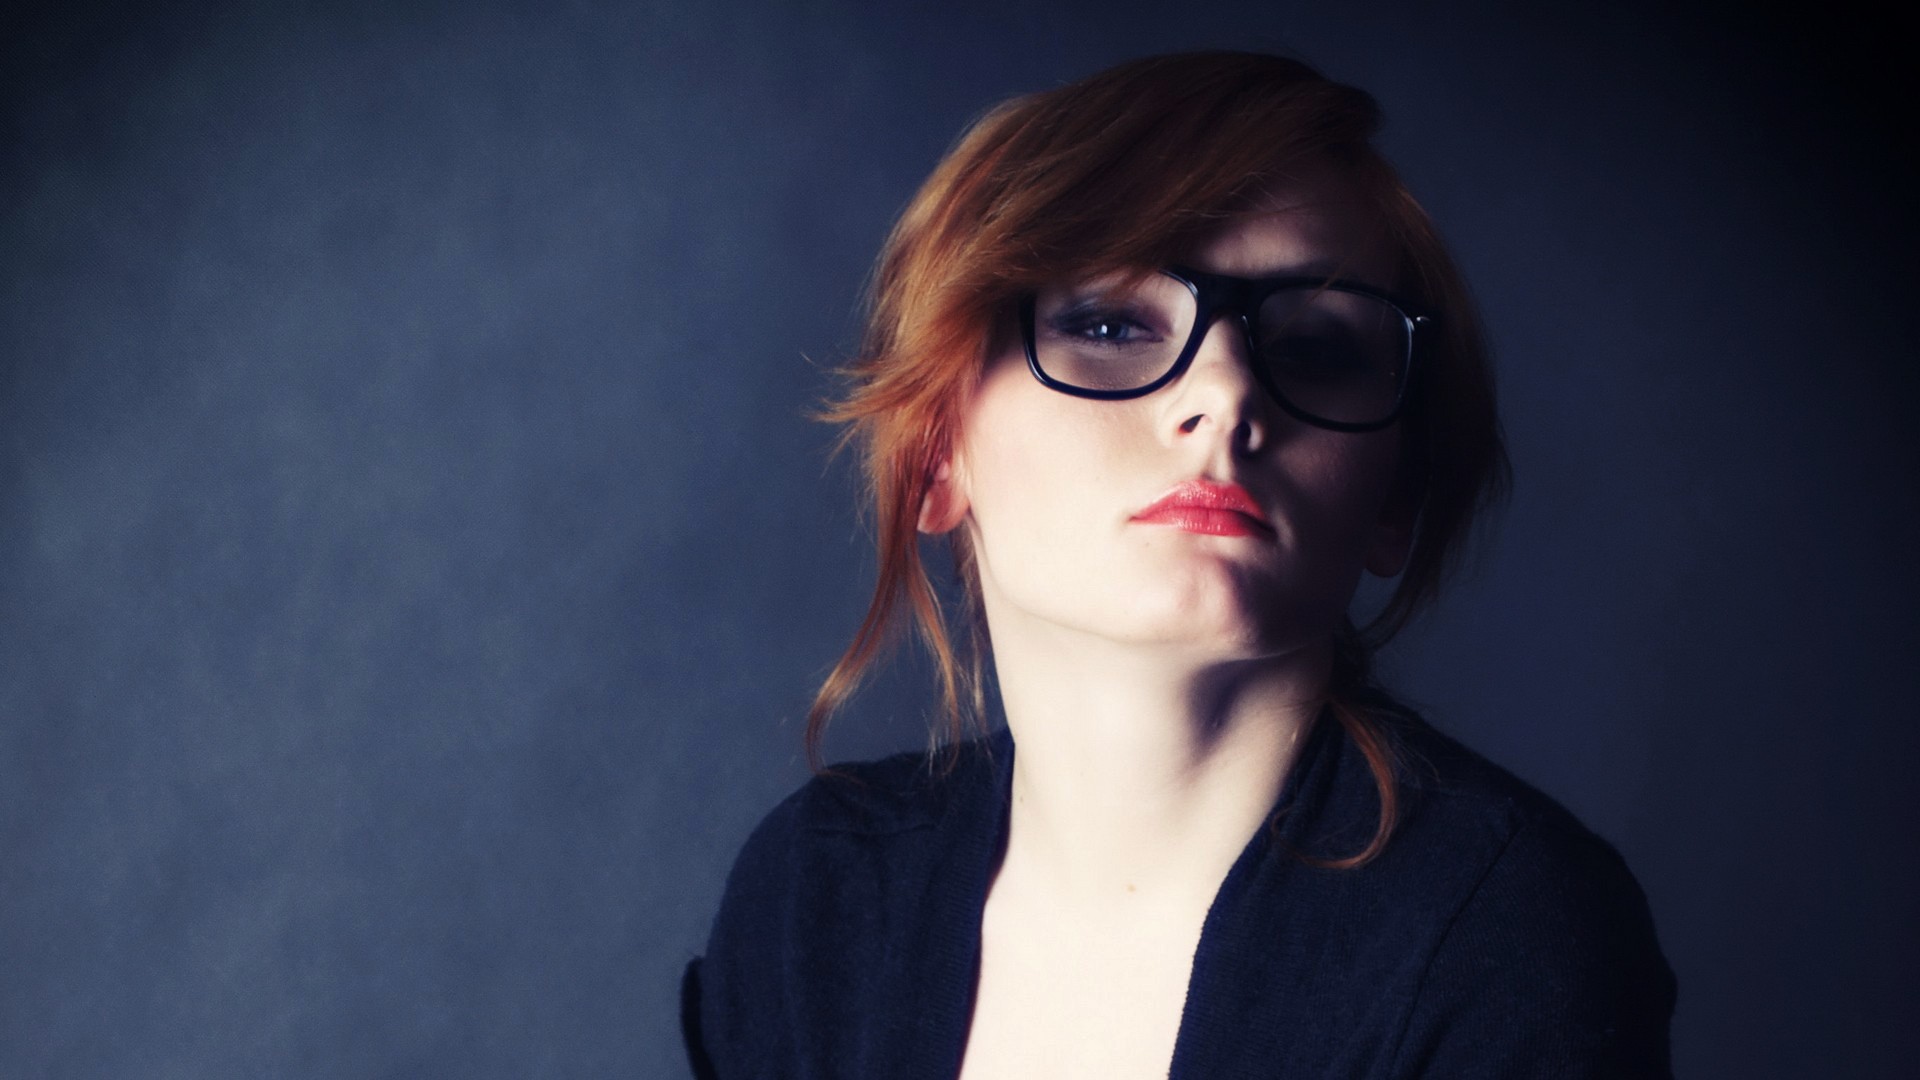 Redhead Women Nerds Women With Glasses Glasses Face Model Blue Background 1920x1080